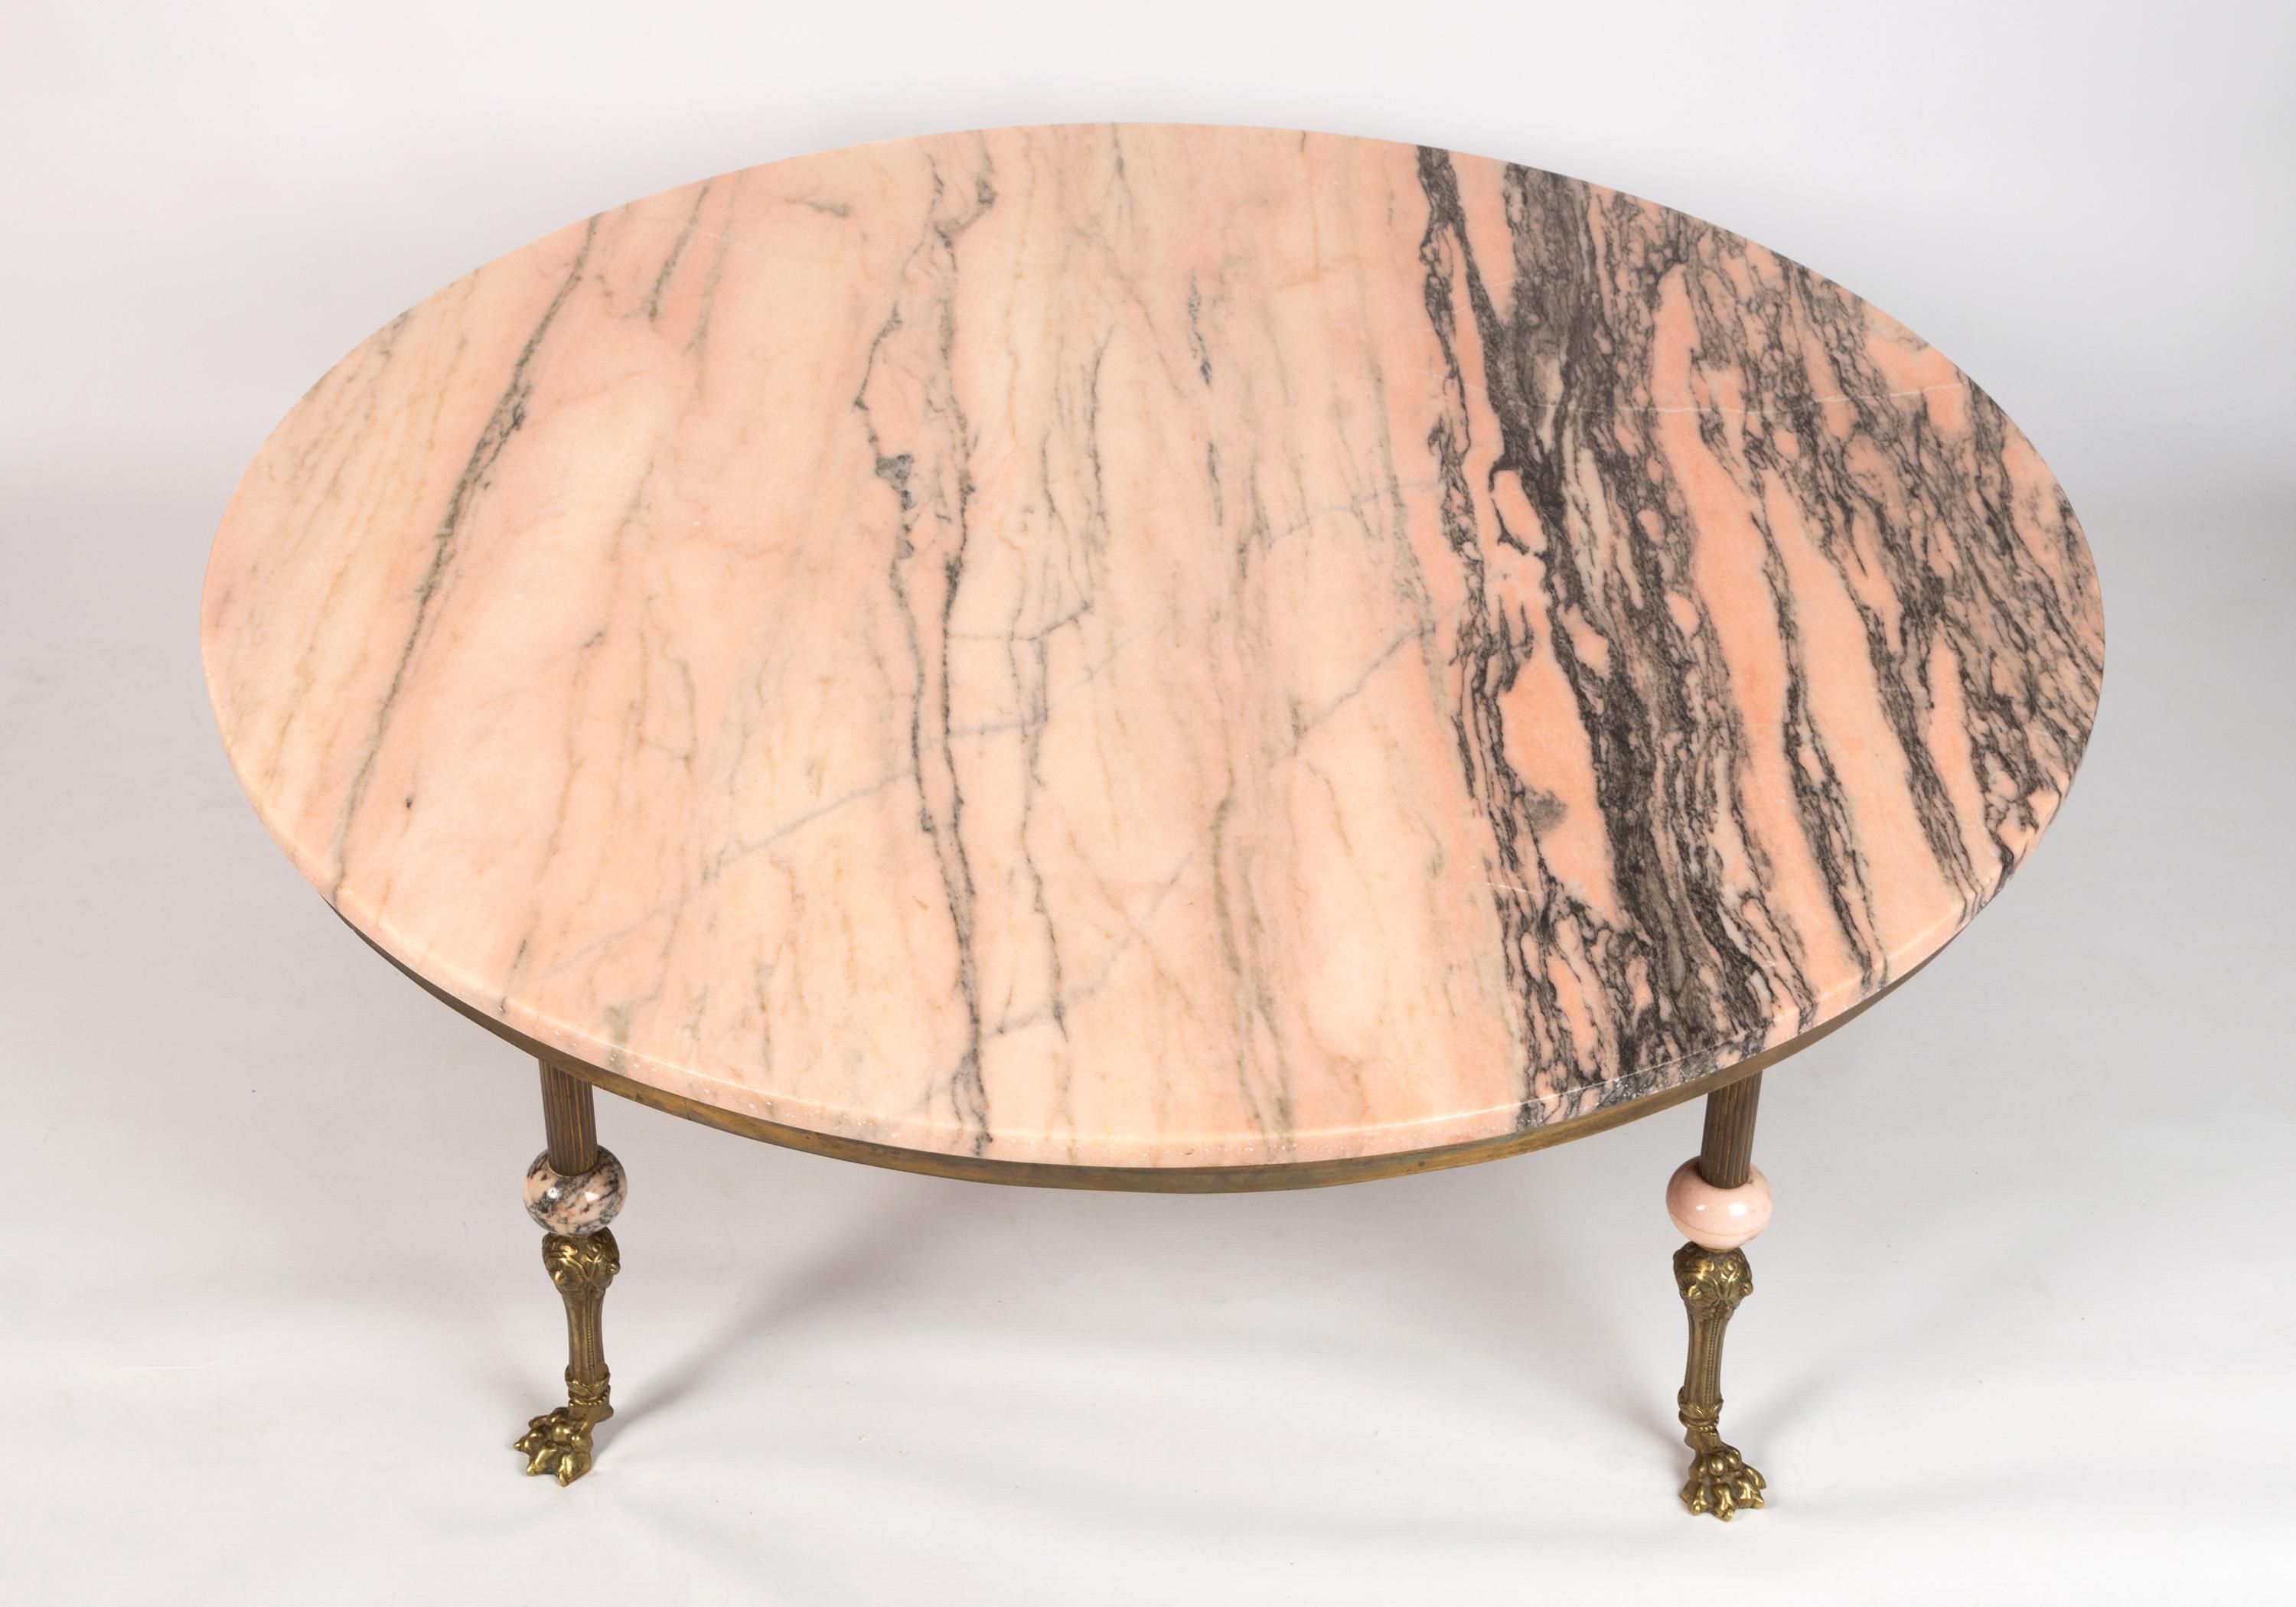 Art Deco French pink marble & brass large coffee table.
By Maison Jansen C.1940.

In very good condition commensurate with age.